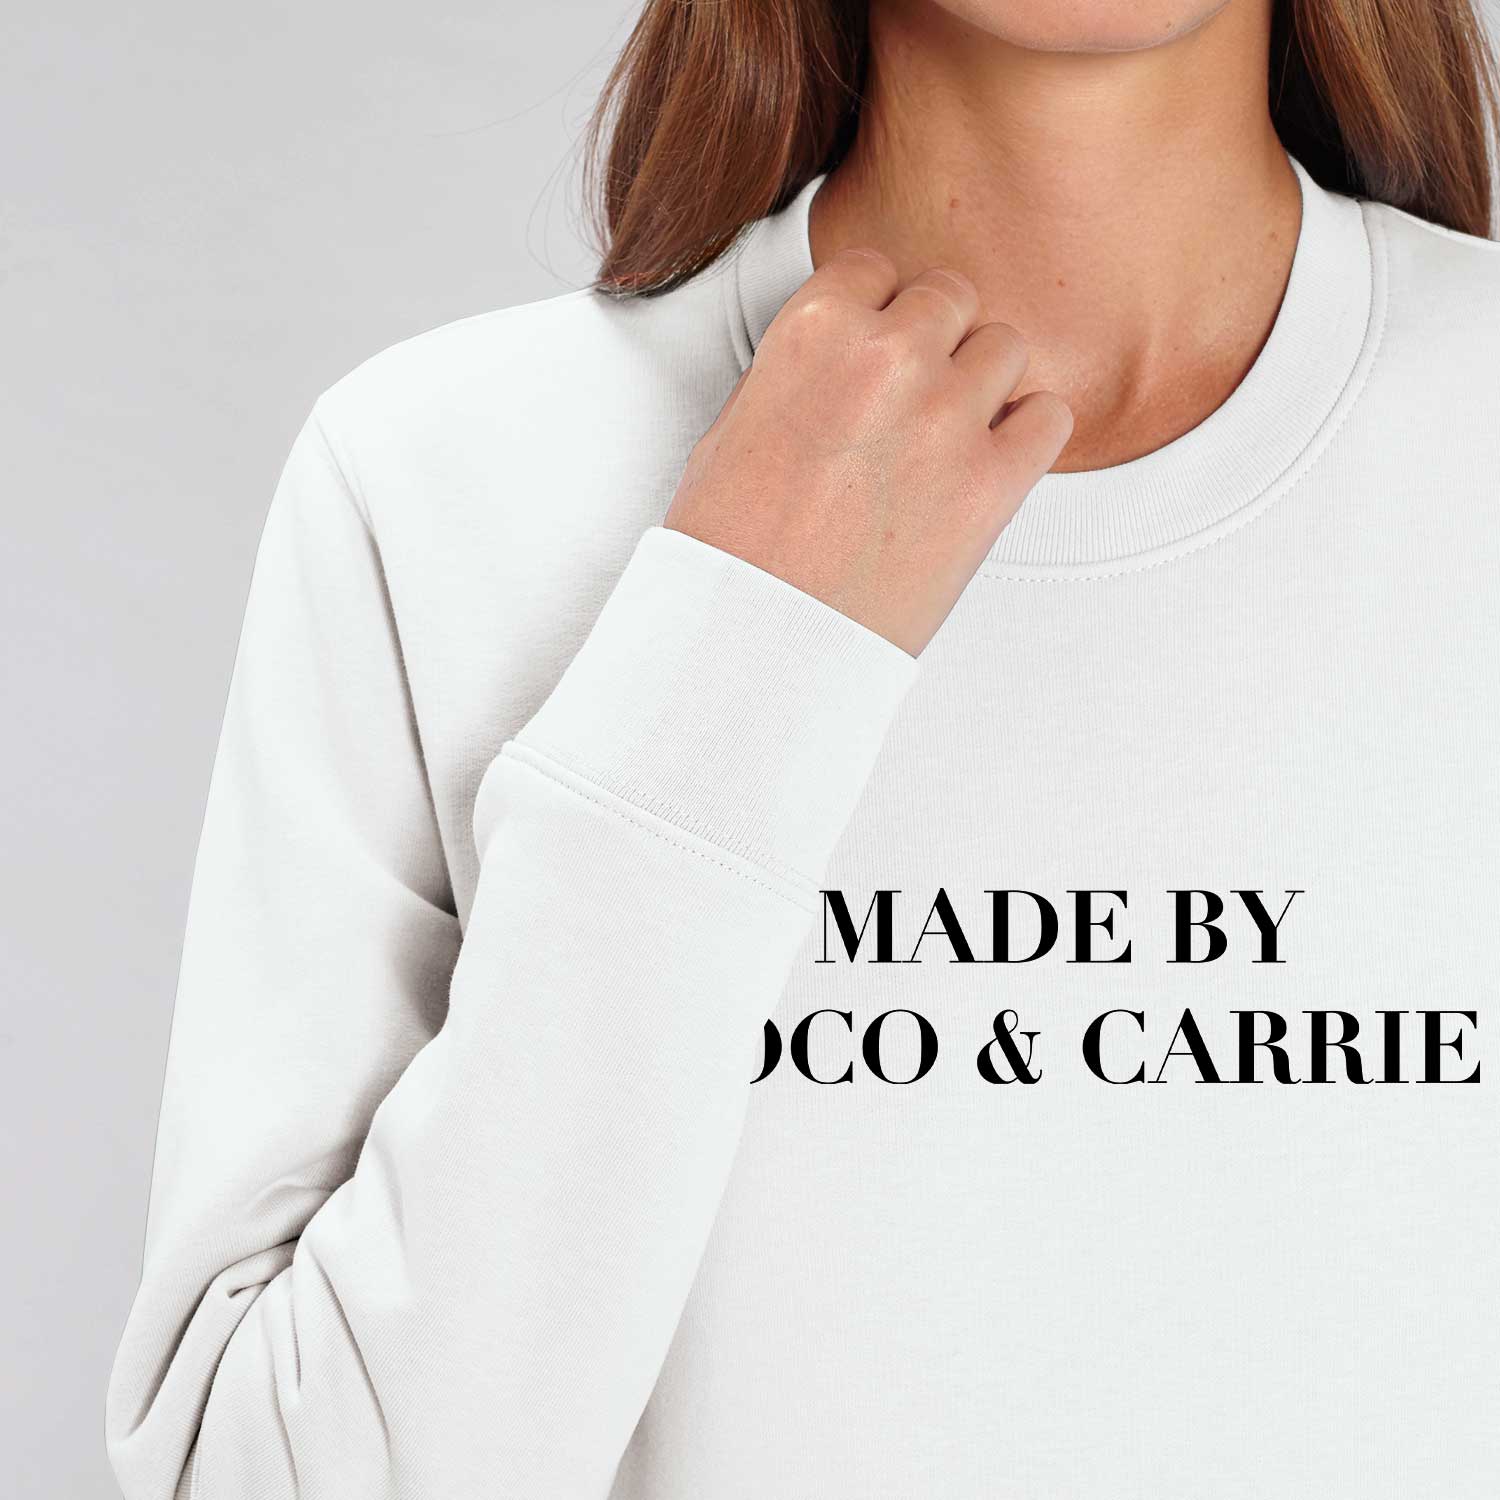 Sweatshirt - Made by Coco & Carrie